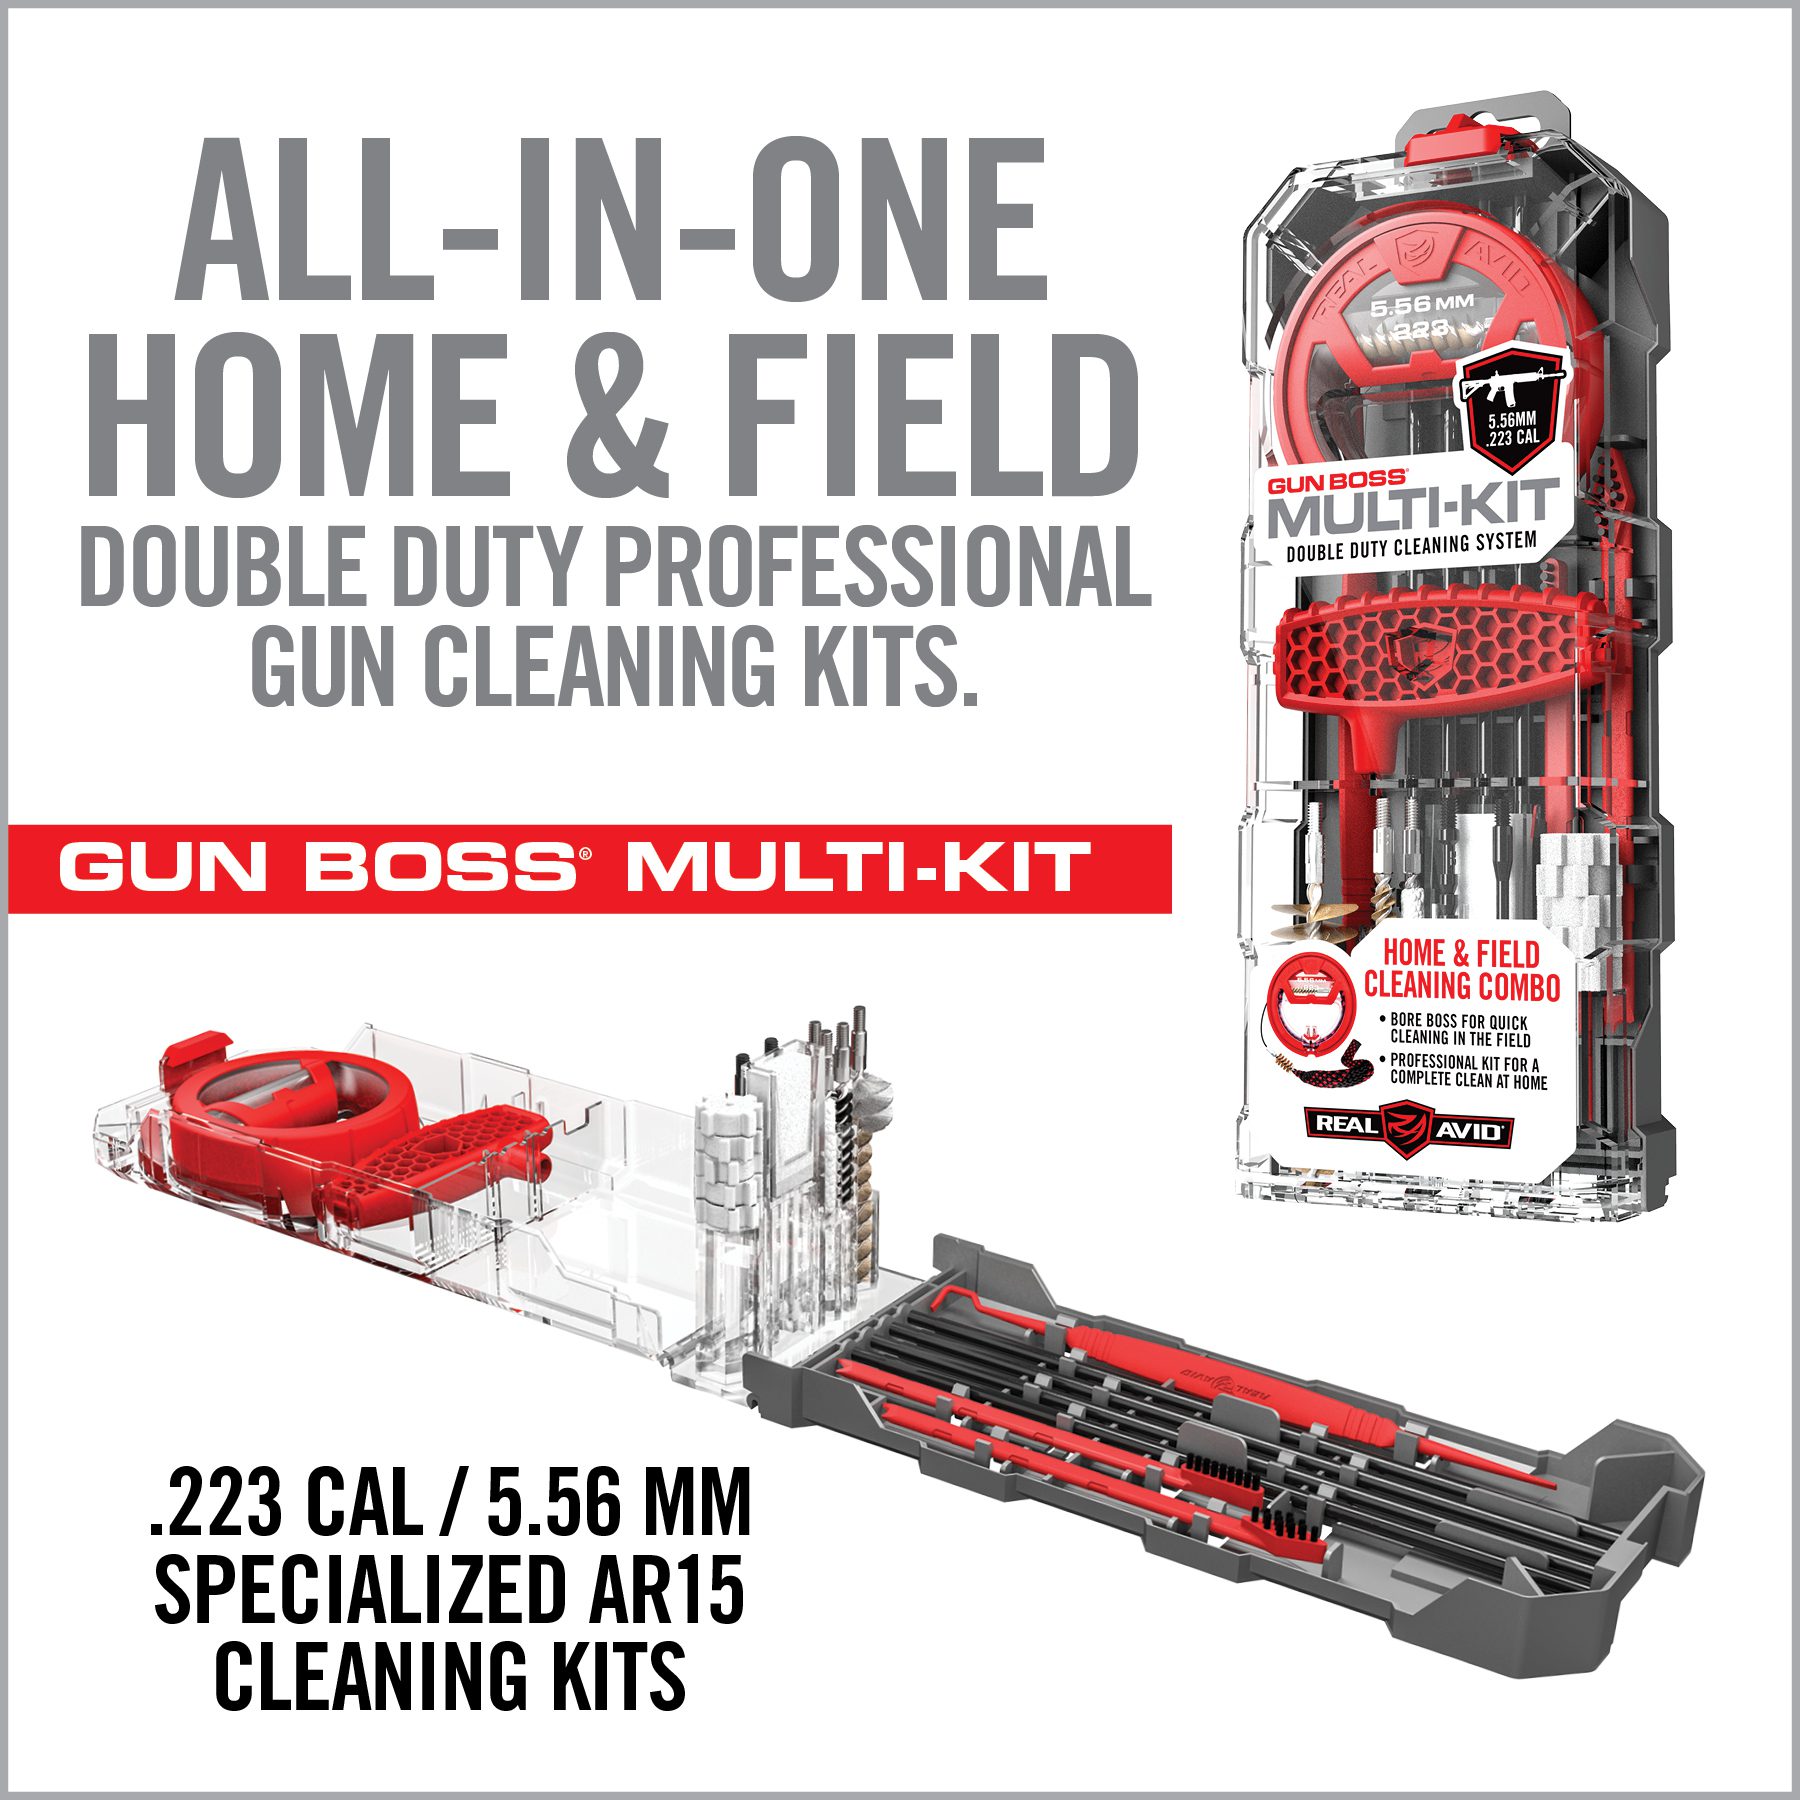 the gun boss multi - kit includes all in one home and field